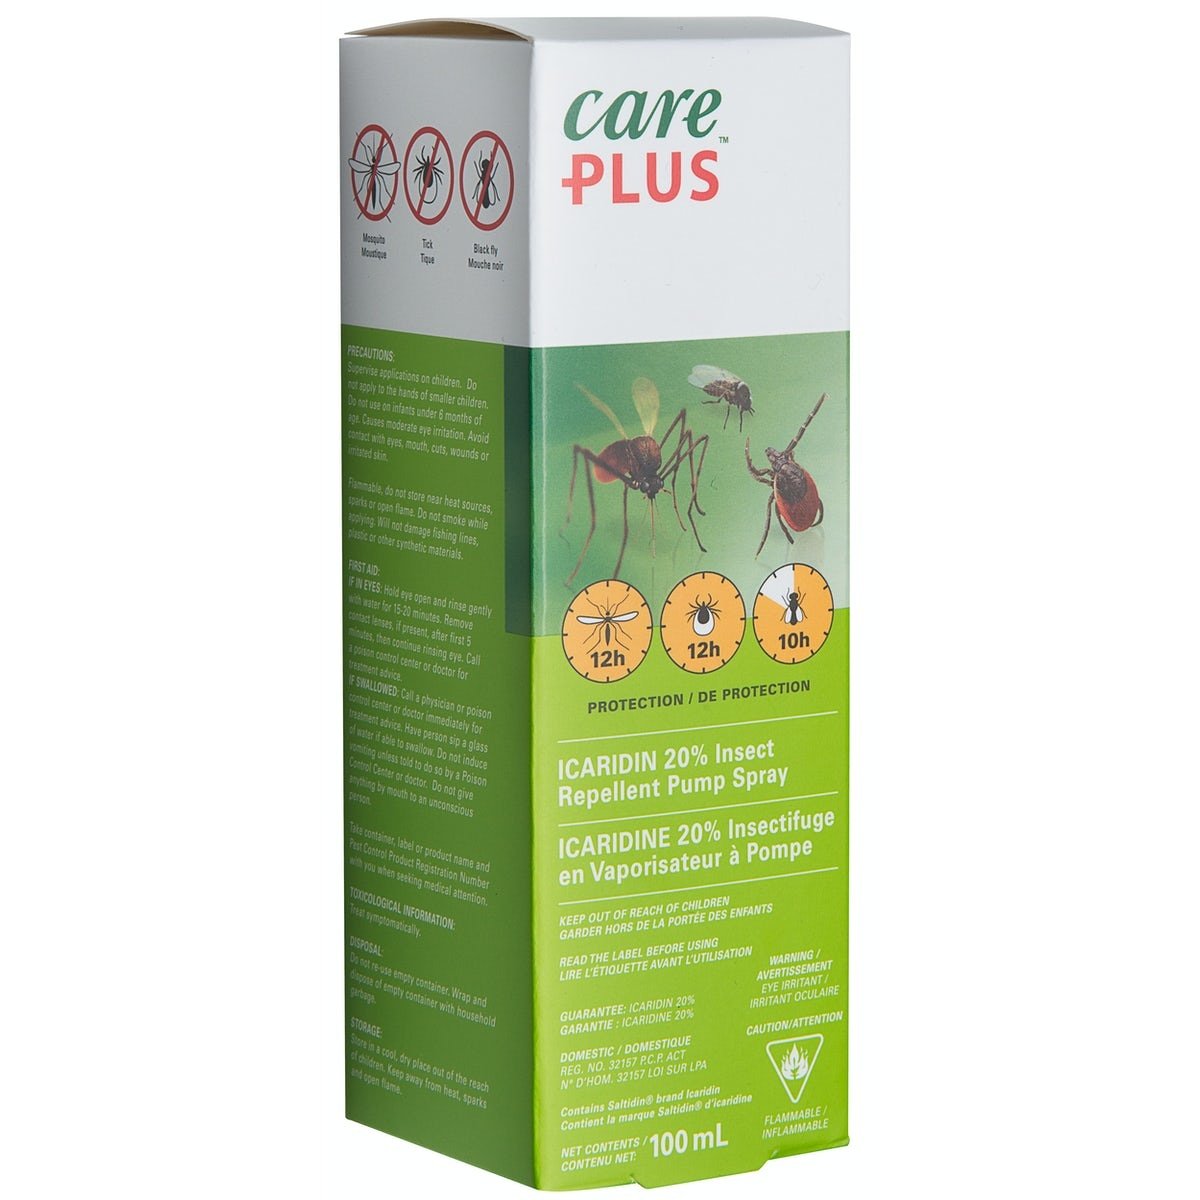 Care Plus Insect Repellent 100ml